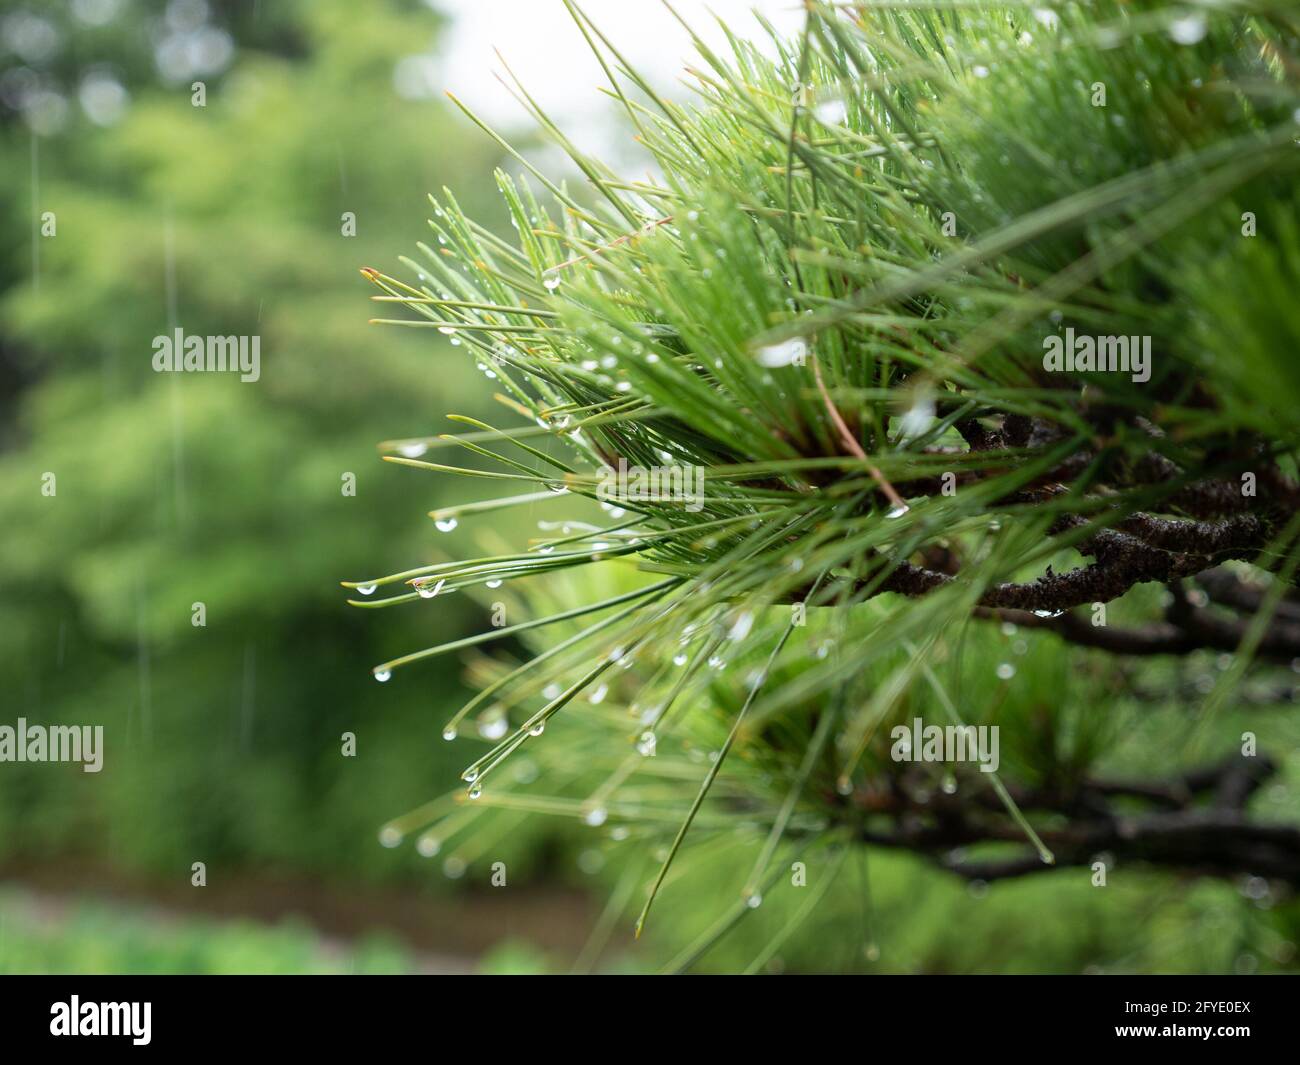 Detail of Japanese pine needles with water drops (Pinus thunbergii) Stock Photo